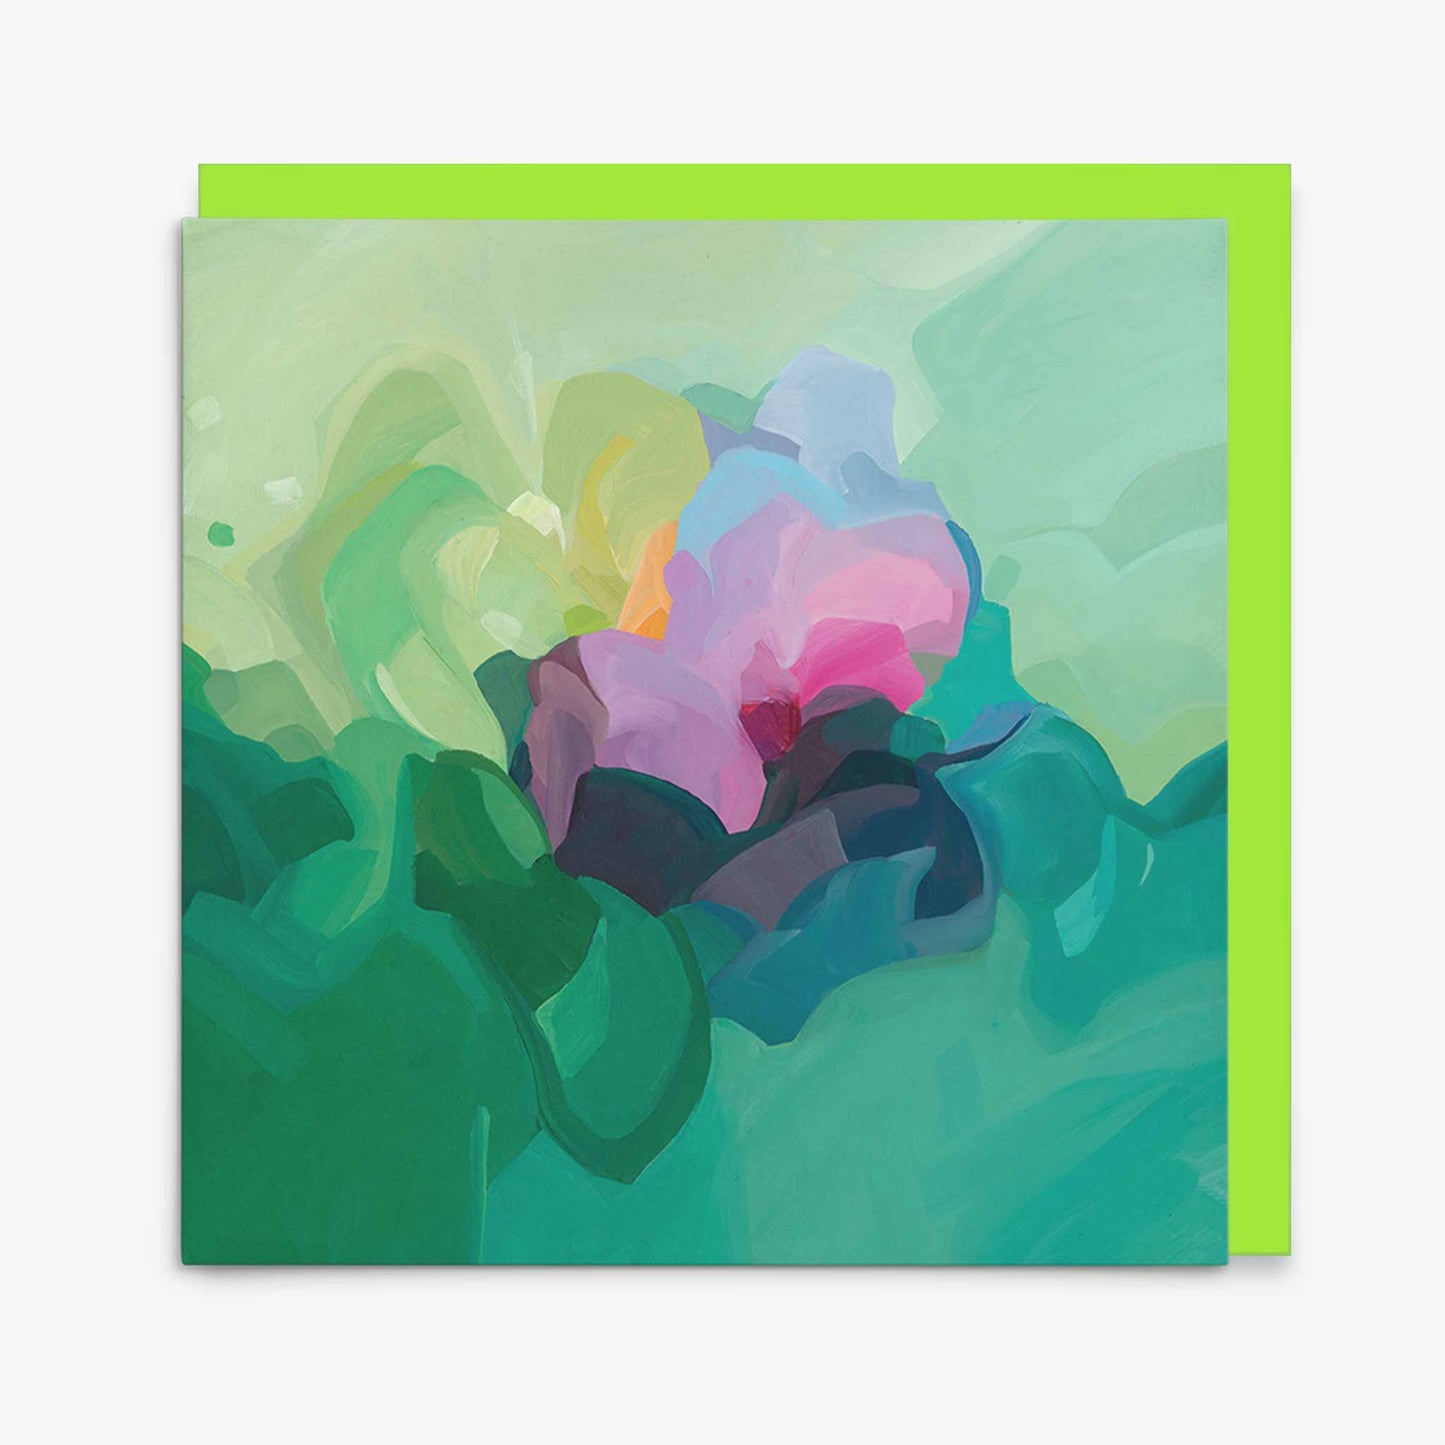 jade green abstract art greeting card with bright green envelope